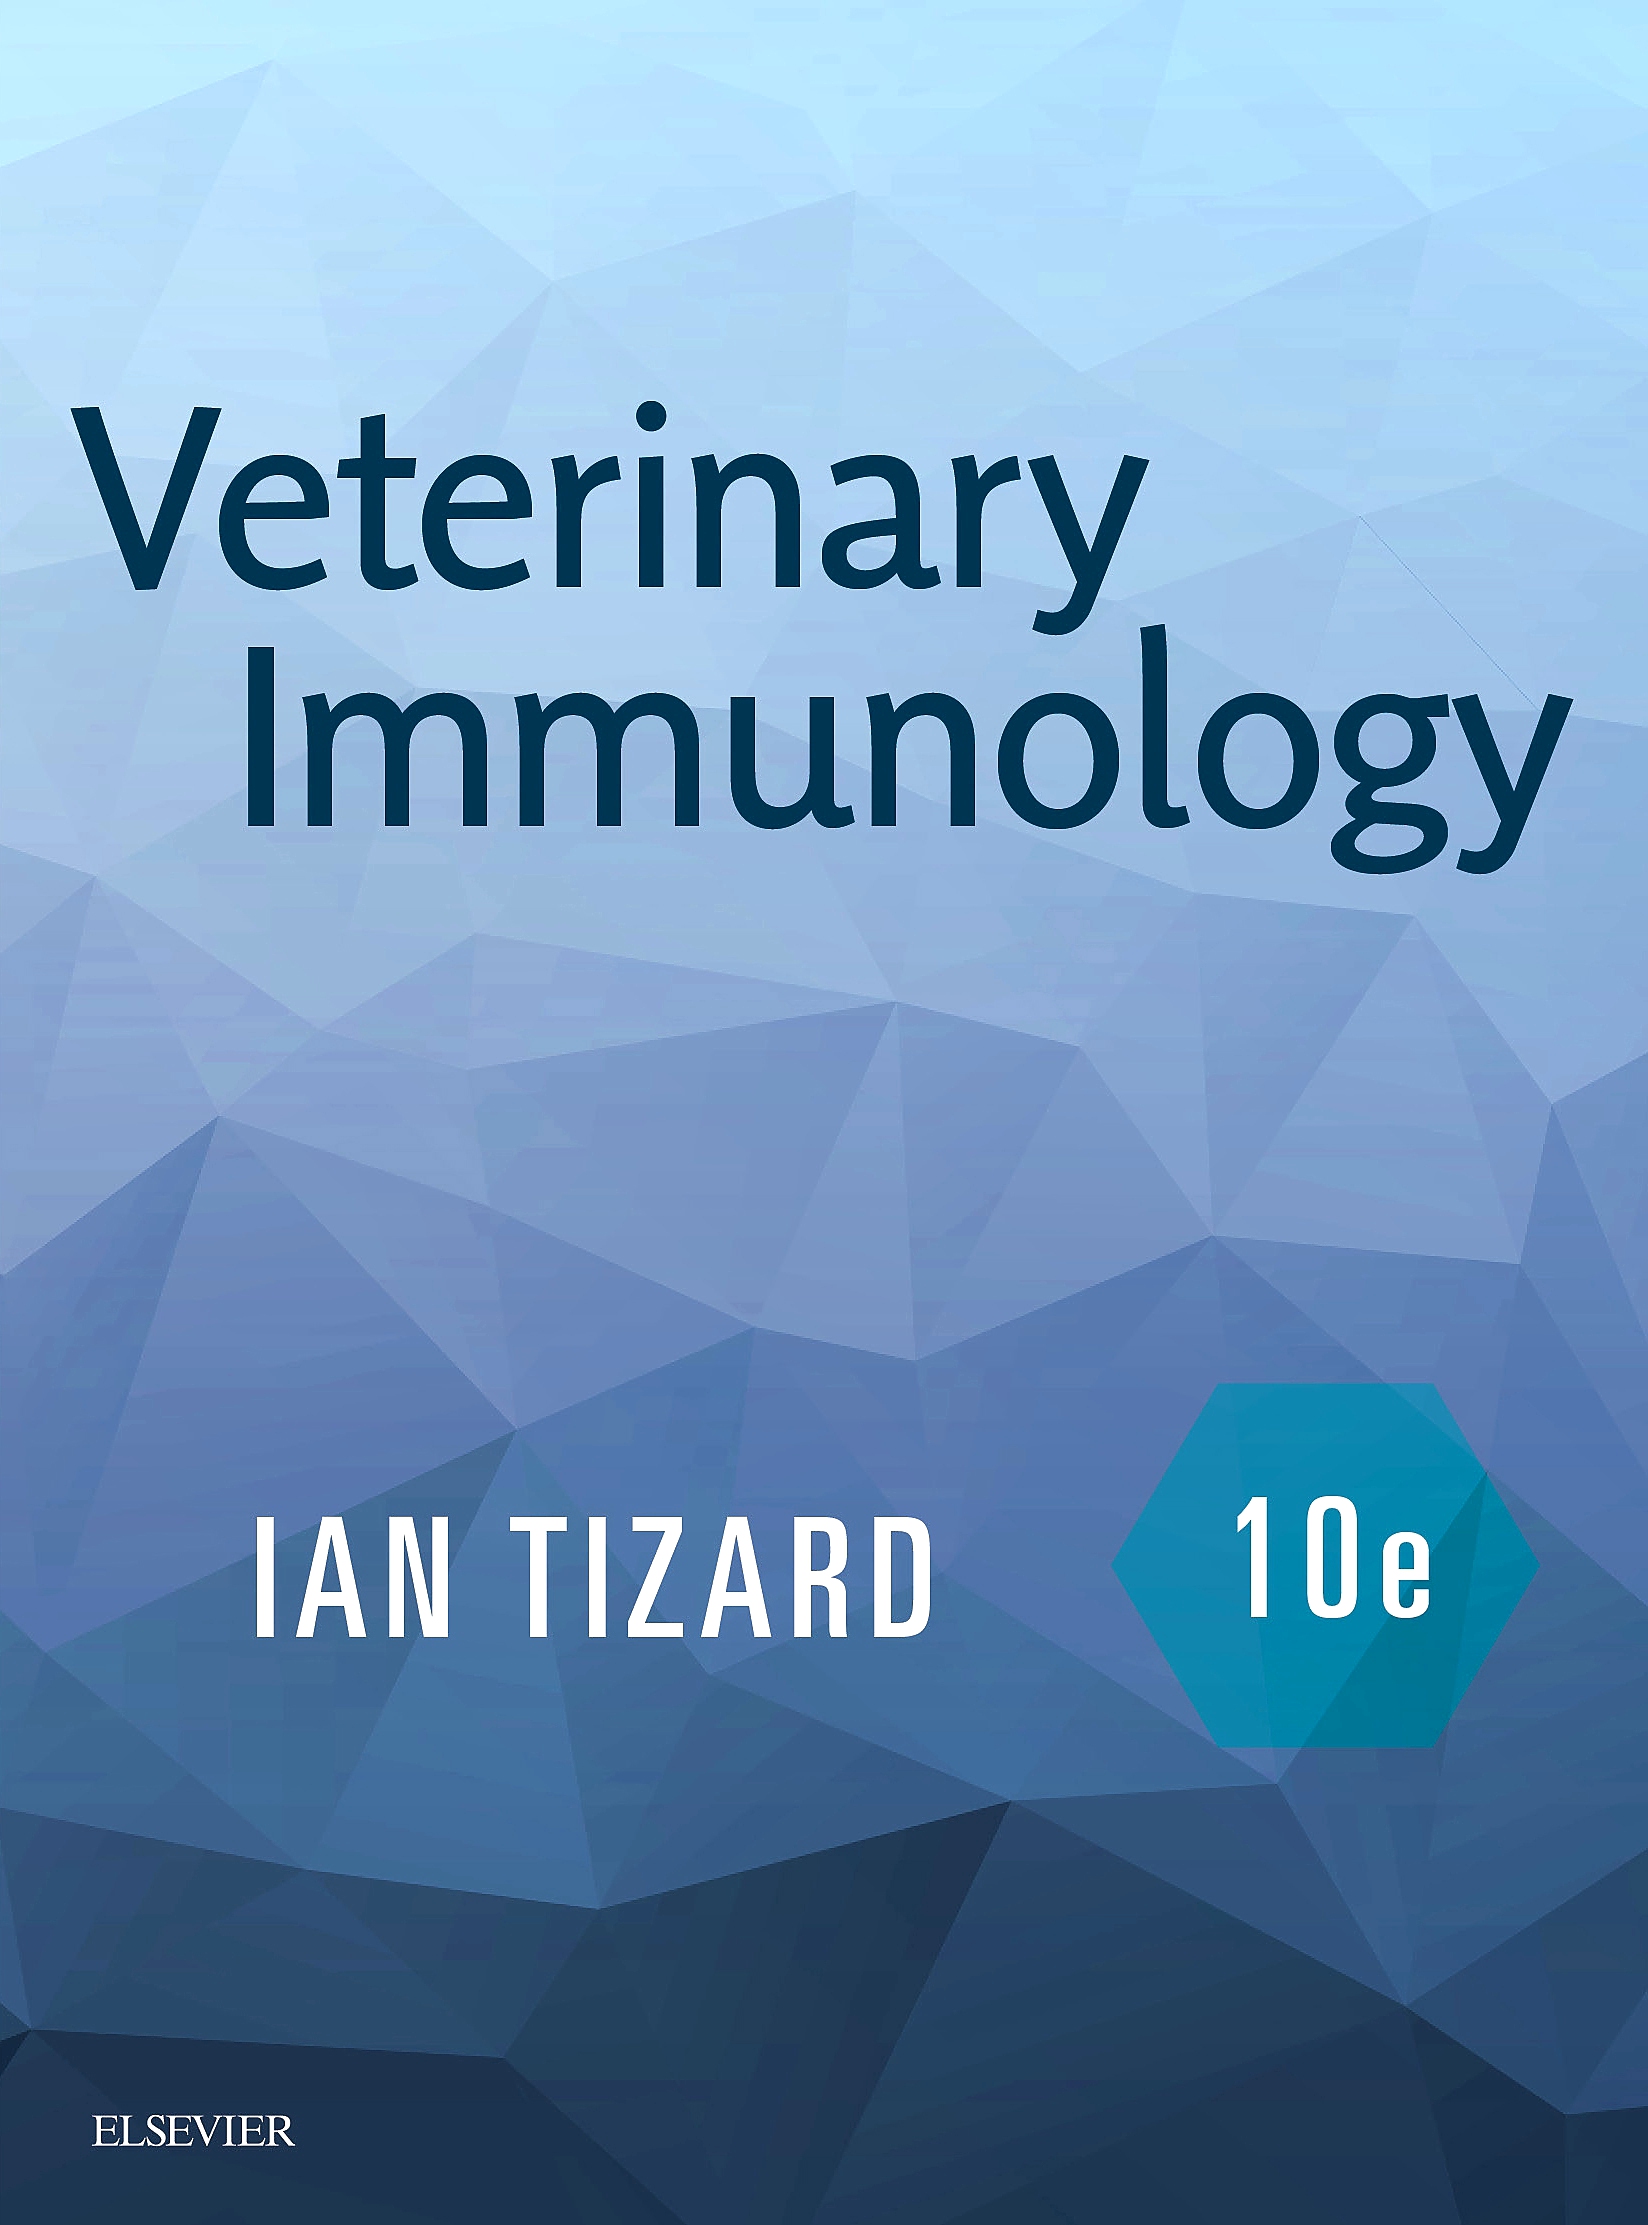 Evolve Resources for Veterinary Immunology, 10th Edition